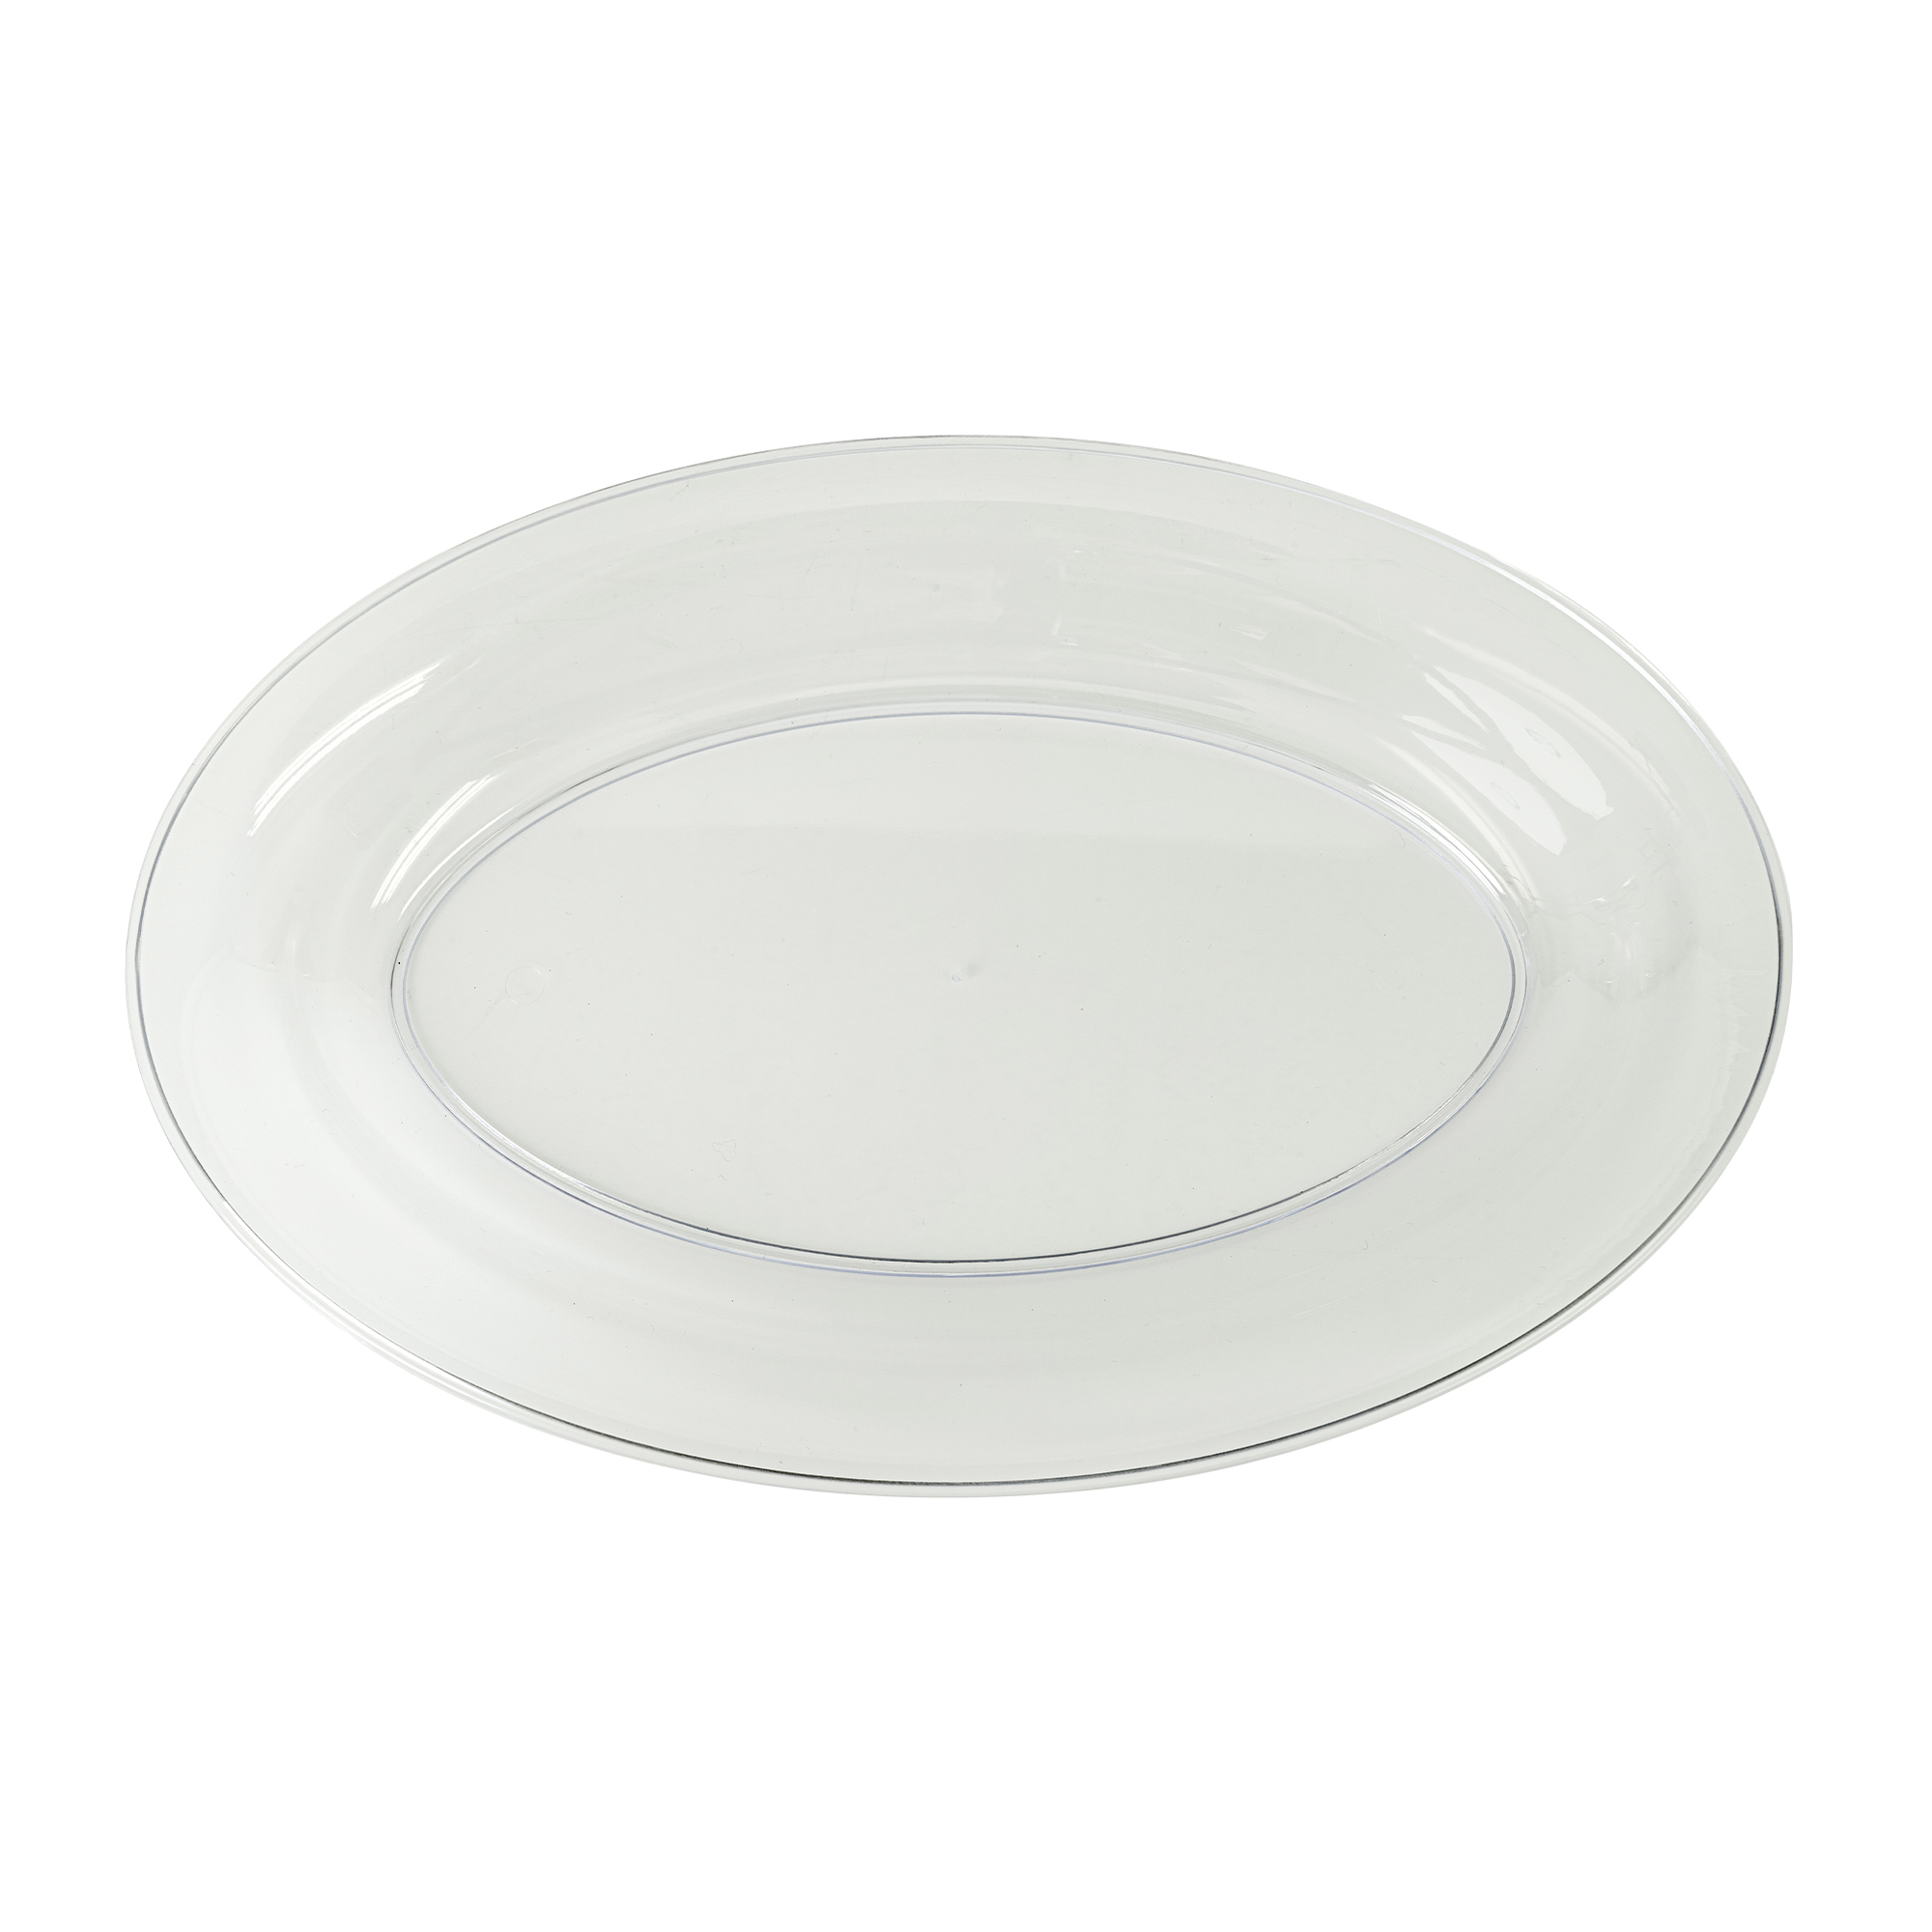 Plastic Oval Serving Tray 18" x 12" - Clear